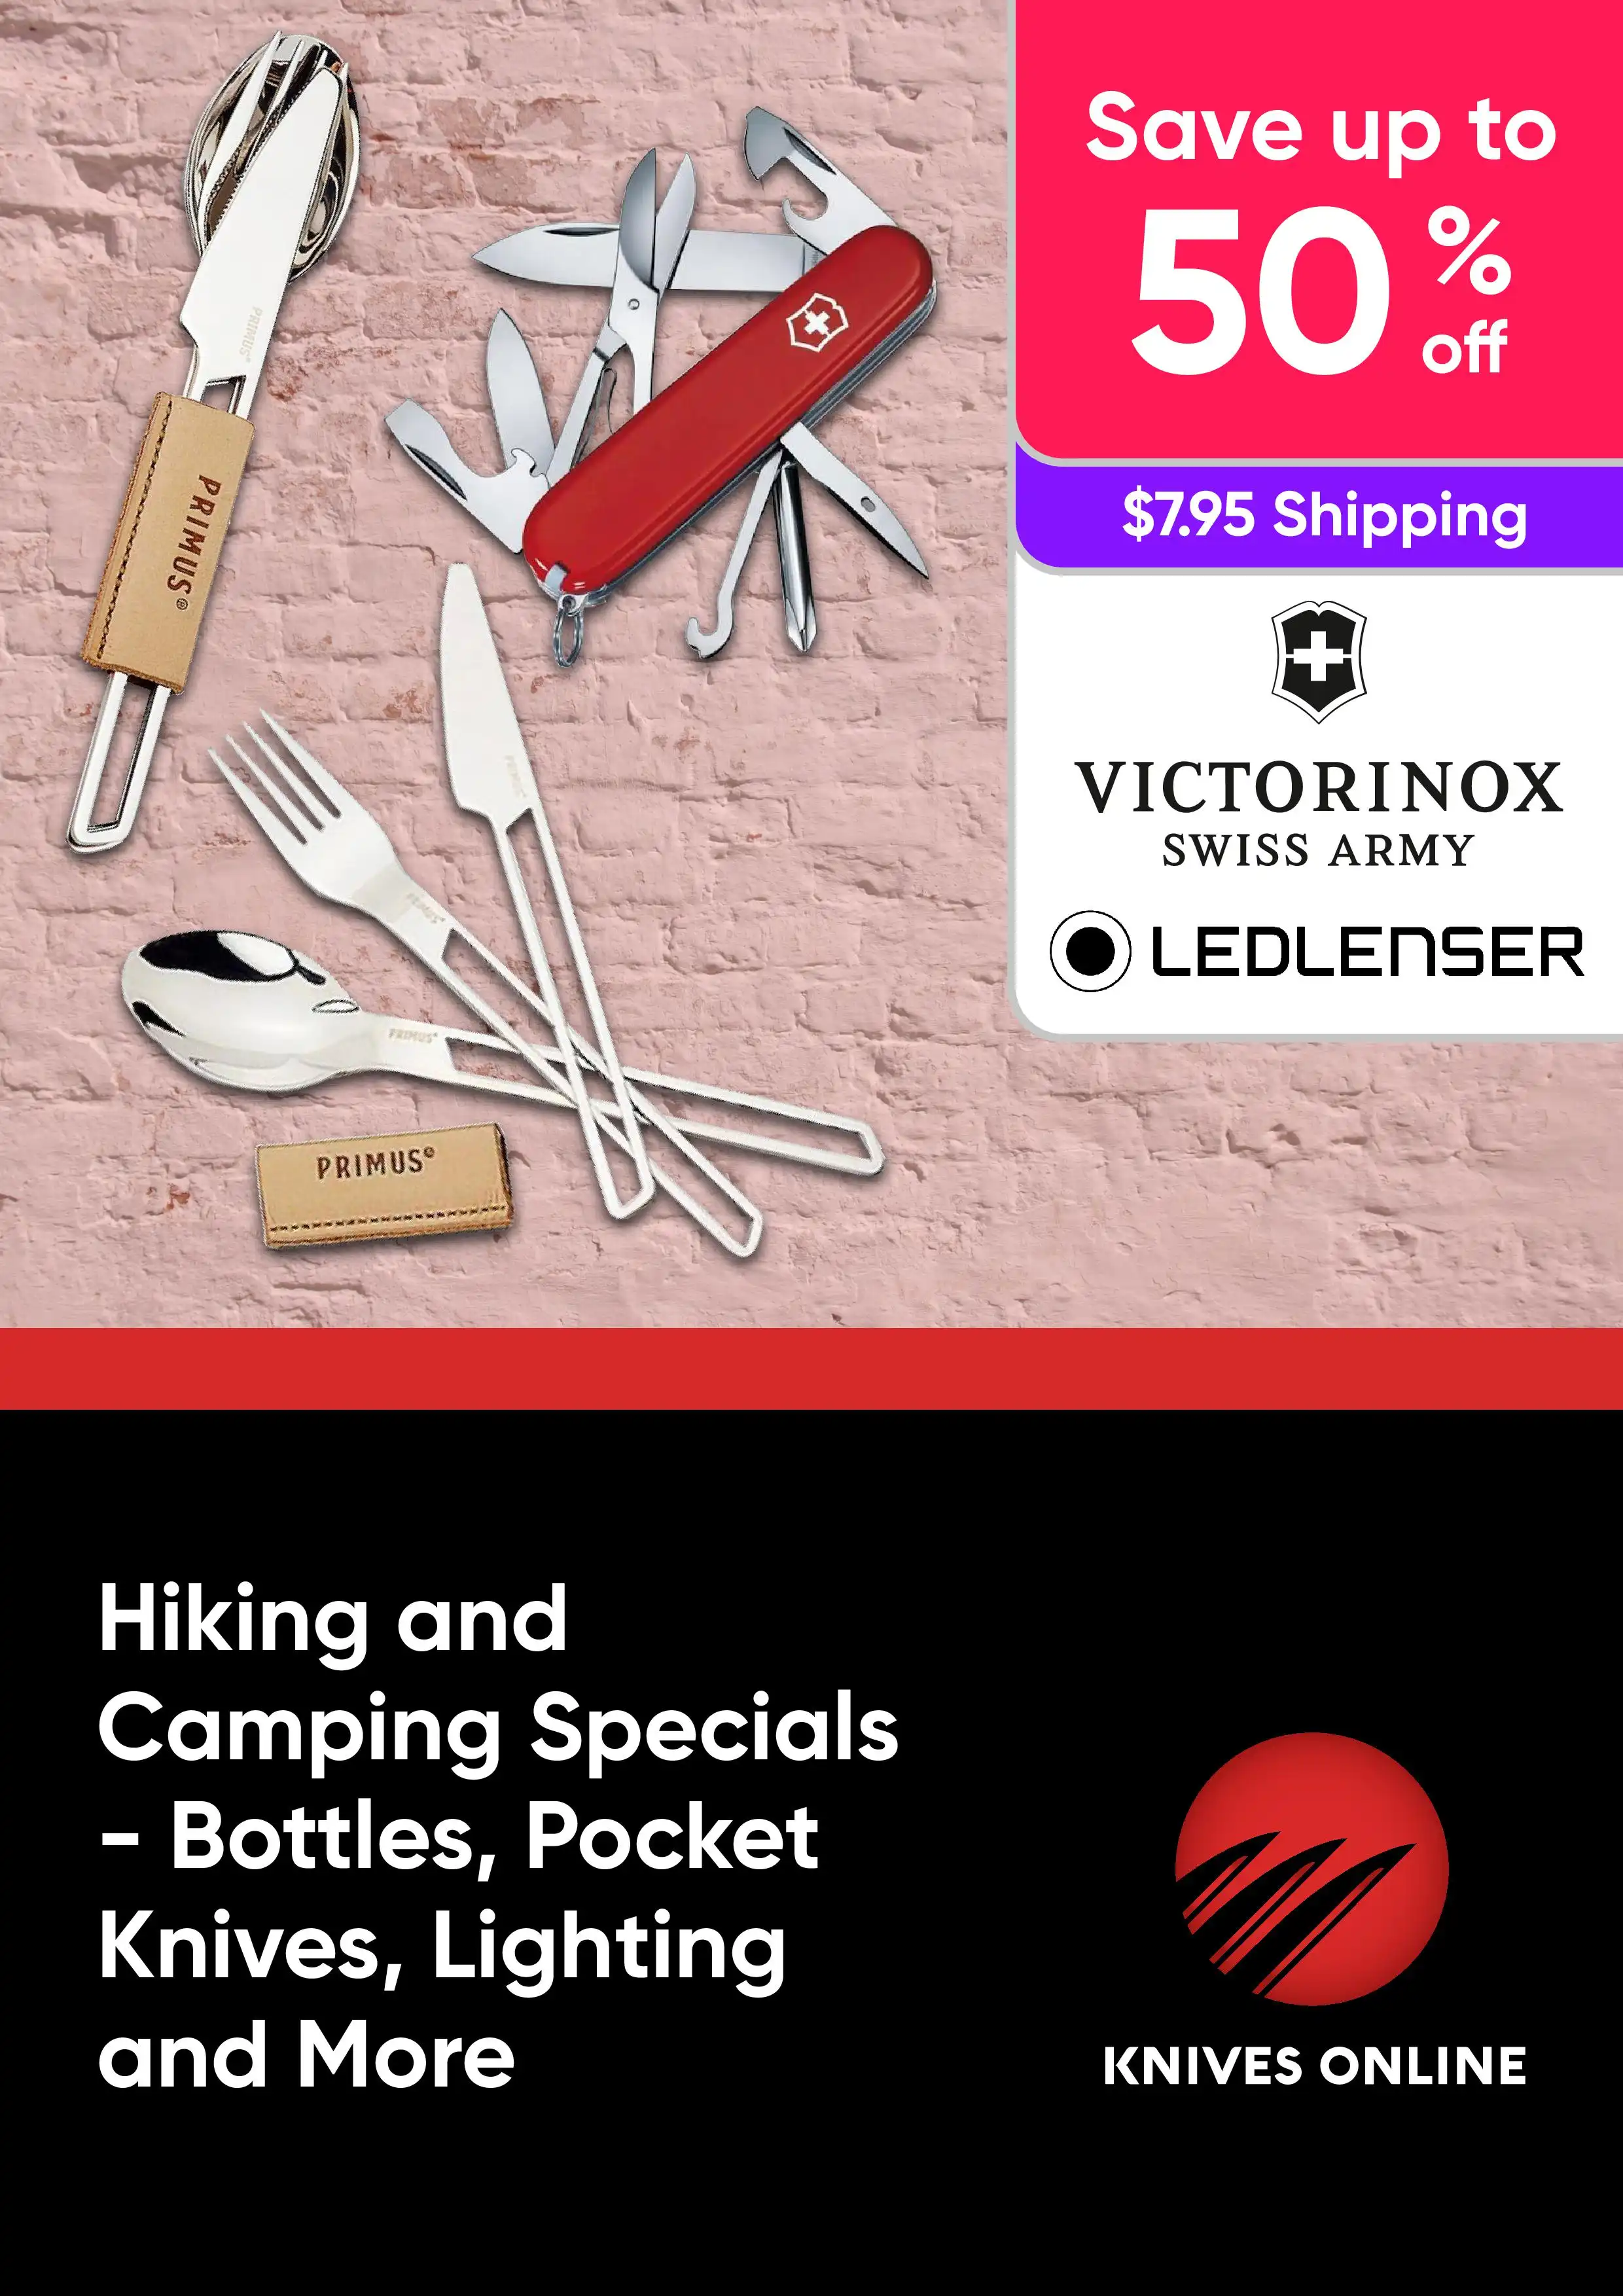 Hiking and Camping Specials - Bottles, Pocket Knives, Lighters and More - Swiss Army, Victroinox, LED Lenser - Up to 50% off